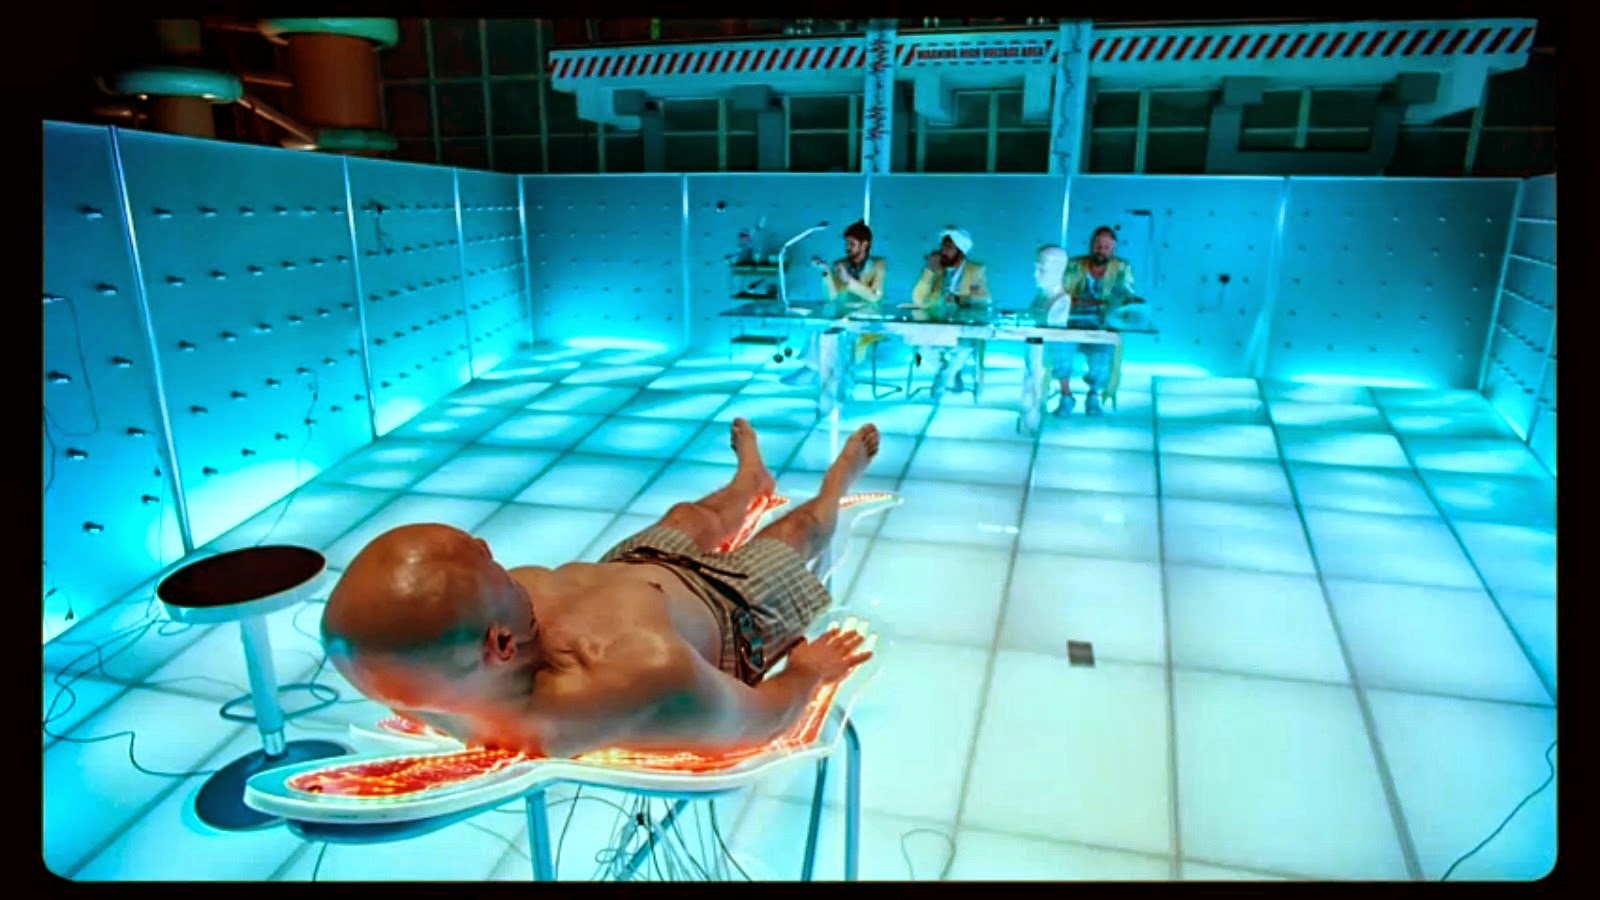 Qohen Leth (Chrisoph Waltz) undergoes evaluation by company doctors in The Zero Theorem (2013)